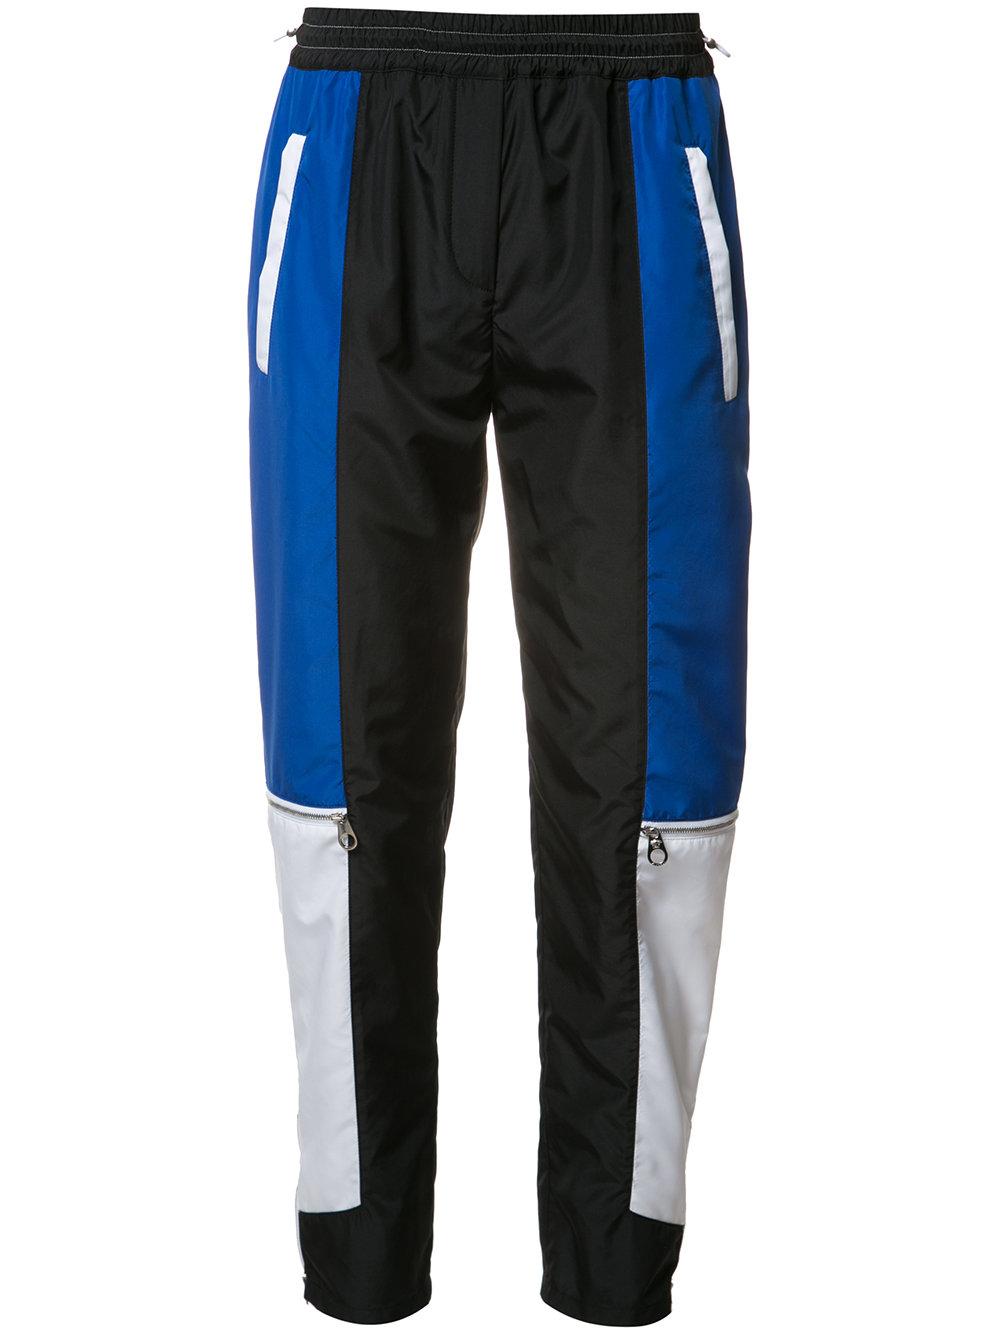 Versace Colour Block Paneled Track Pants in Black | Lyst